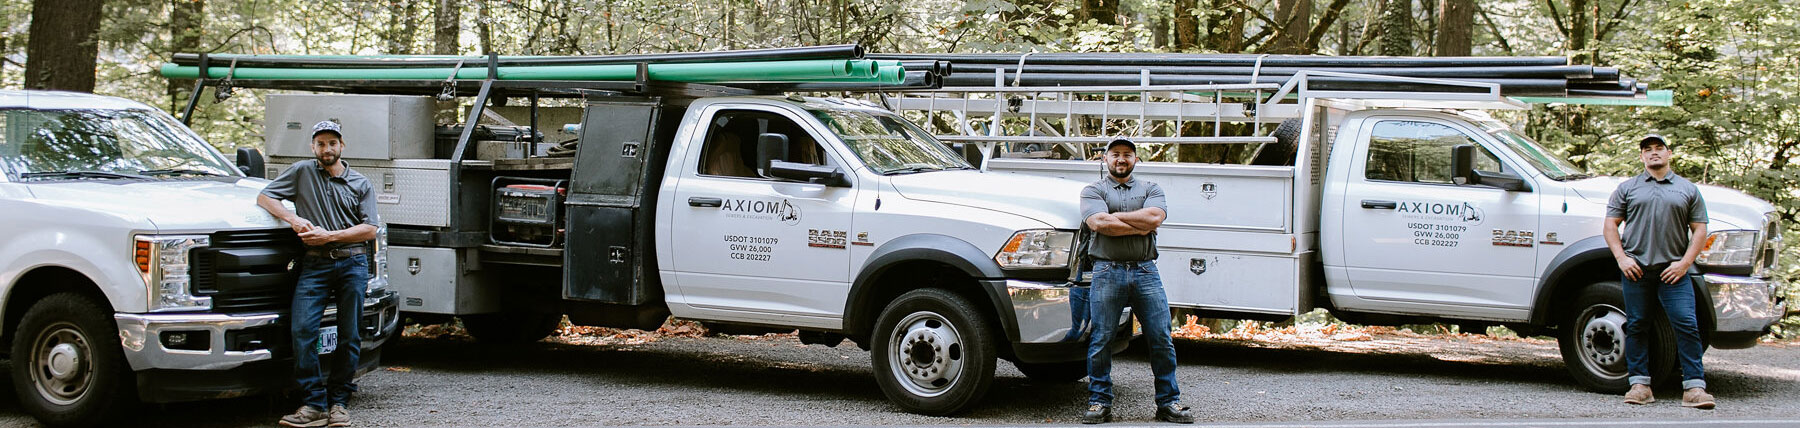 Axiom Sewers & Plumbing Crew with their trucks